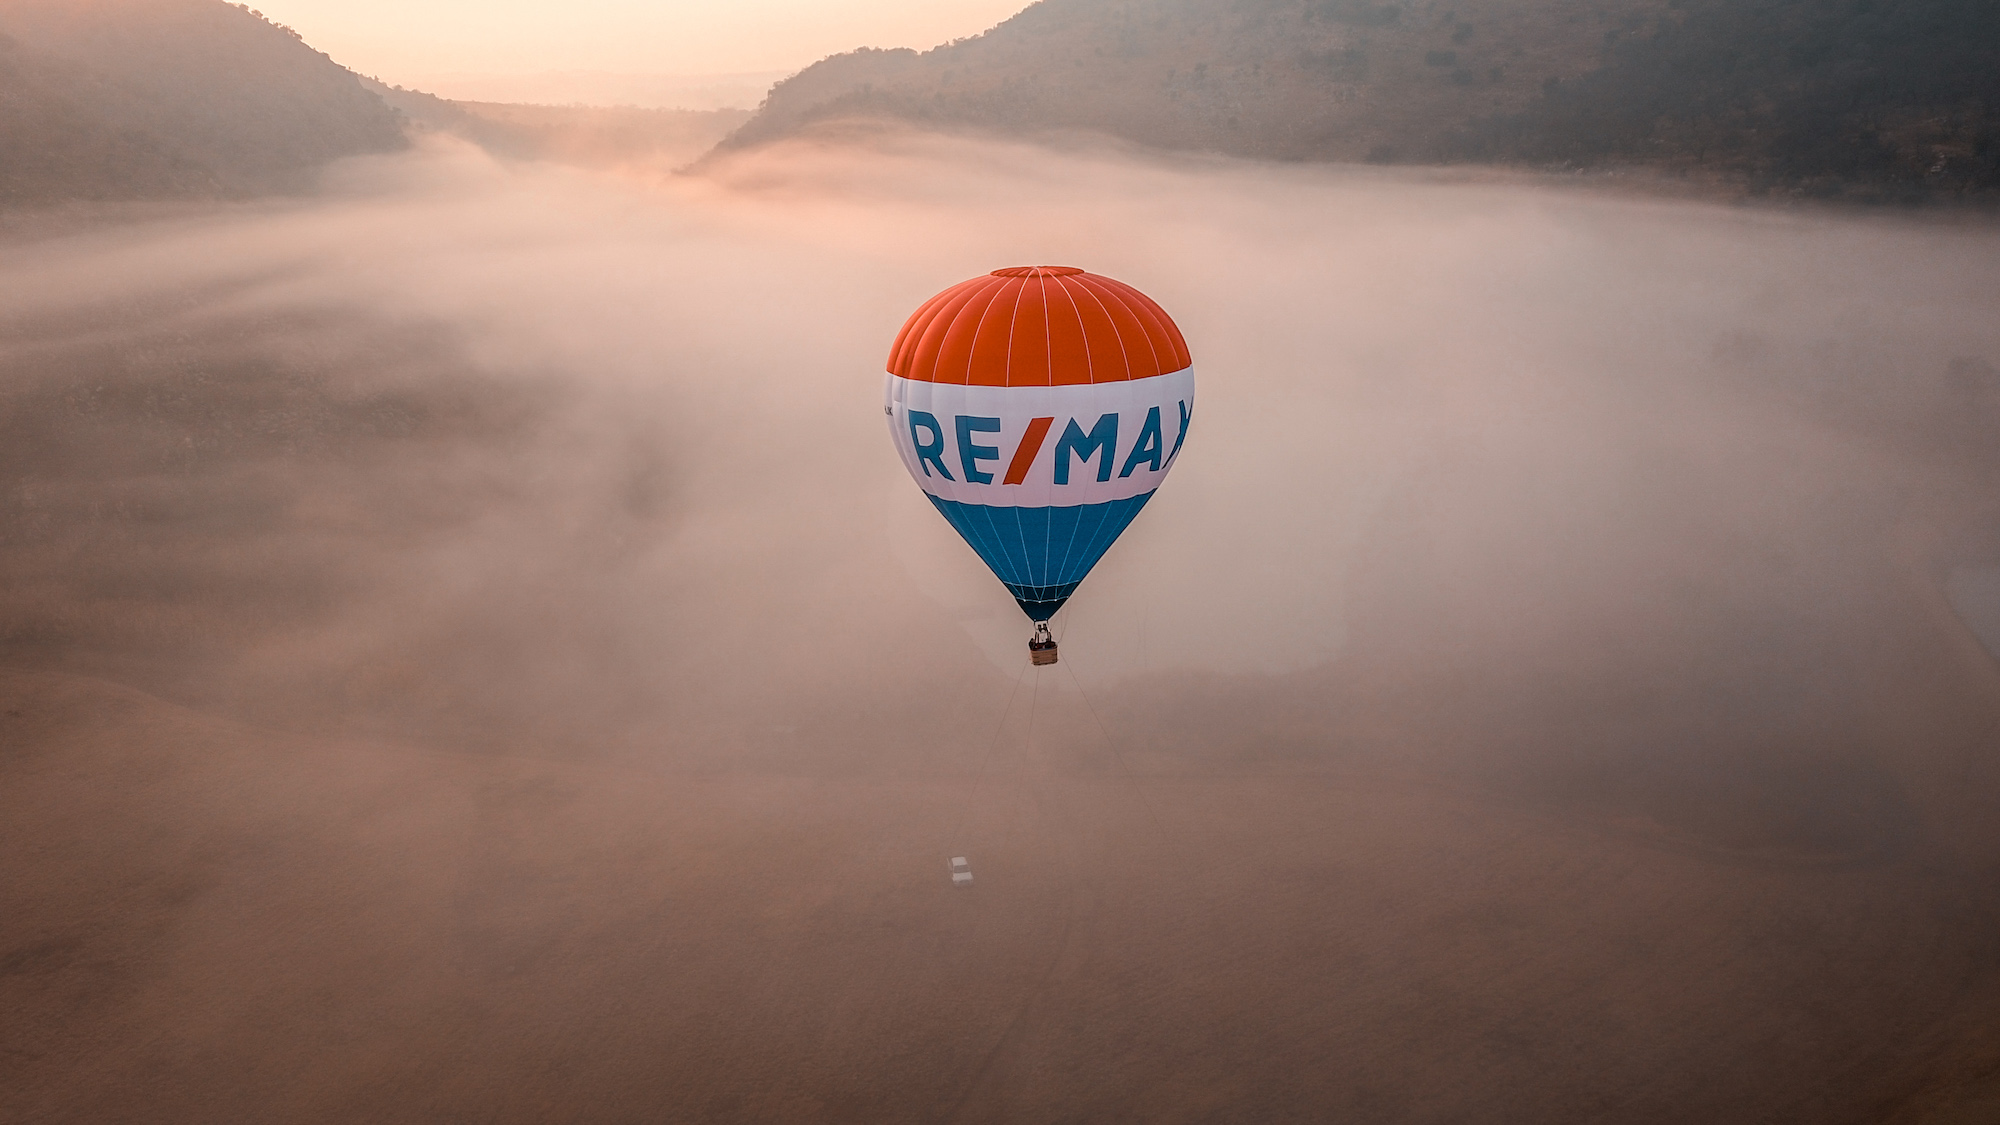 how re/max aims higher, re/max ballon high up in the sky